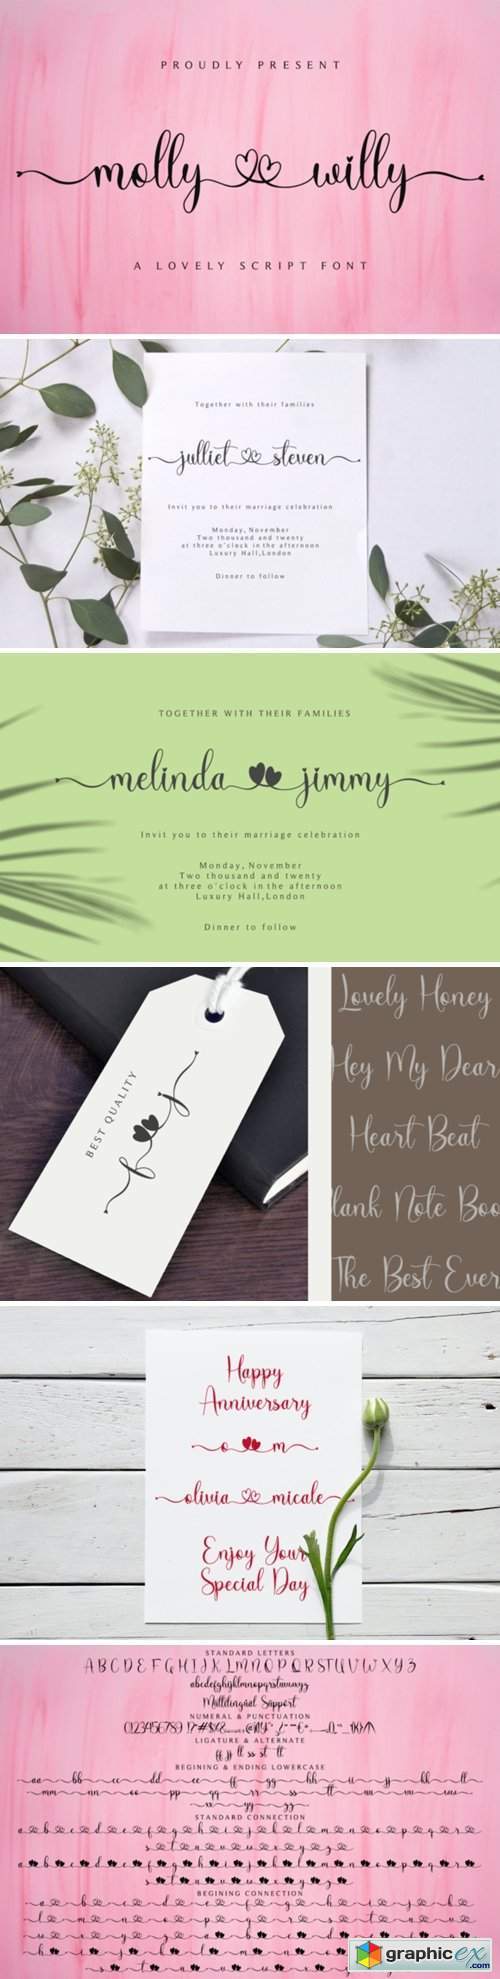 Molly Willy Font